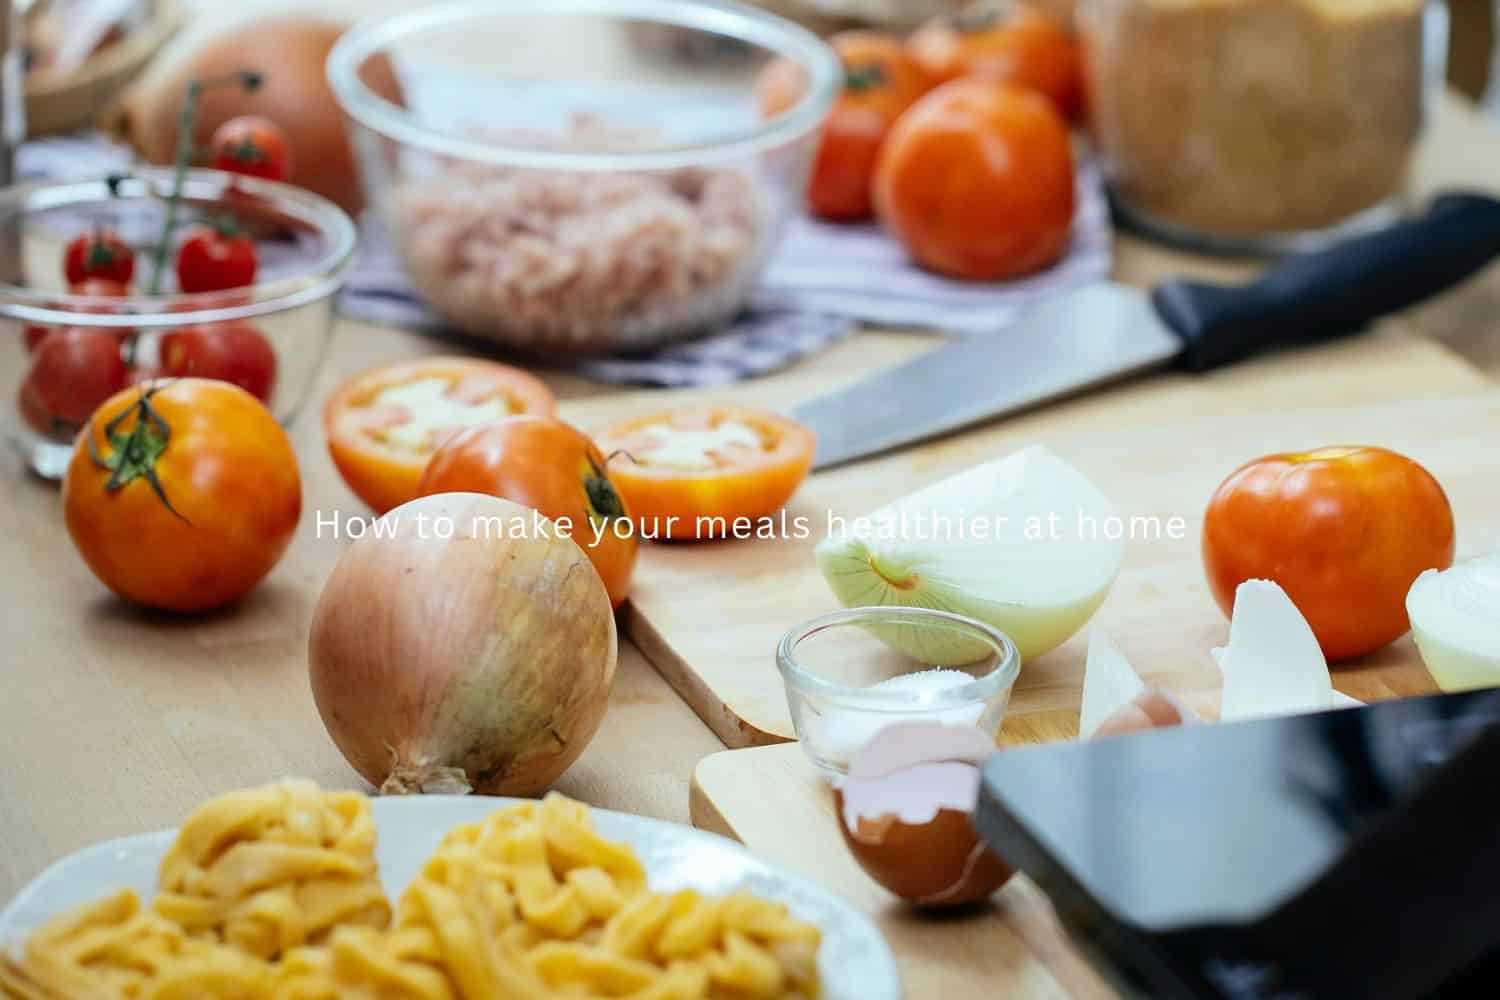 wooden cutting board with cut and chopped vegetables spread out and arranged around the cutting board with chopping knife during meal prepping healthier